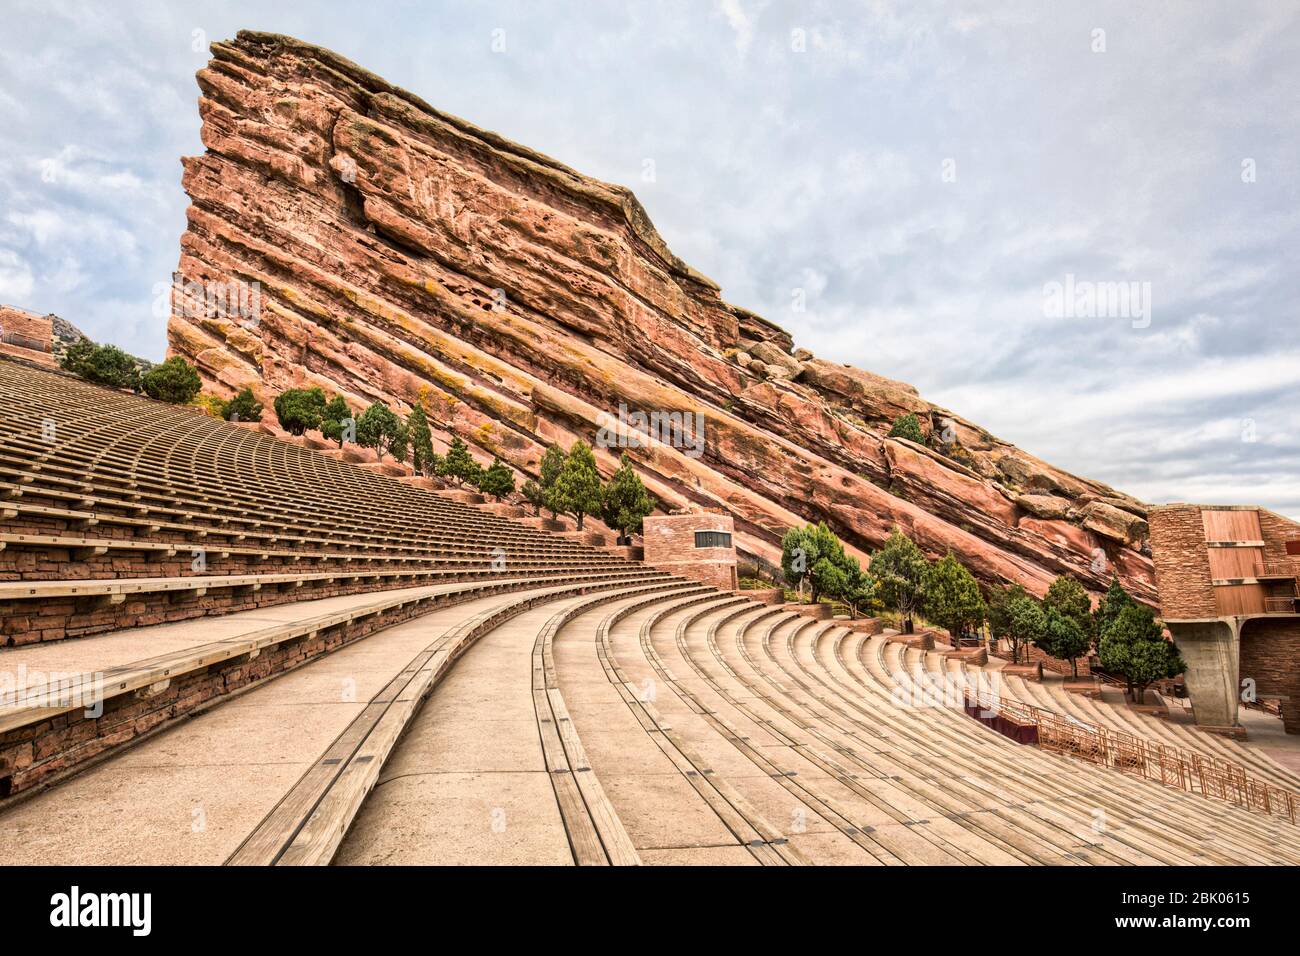 The iconic Red Rocks Amphitheatre just outside of Denver, Colorado, USA. Stock Photo